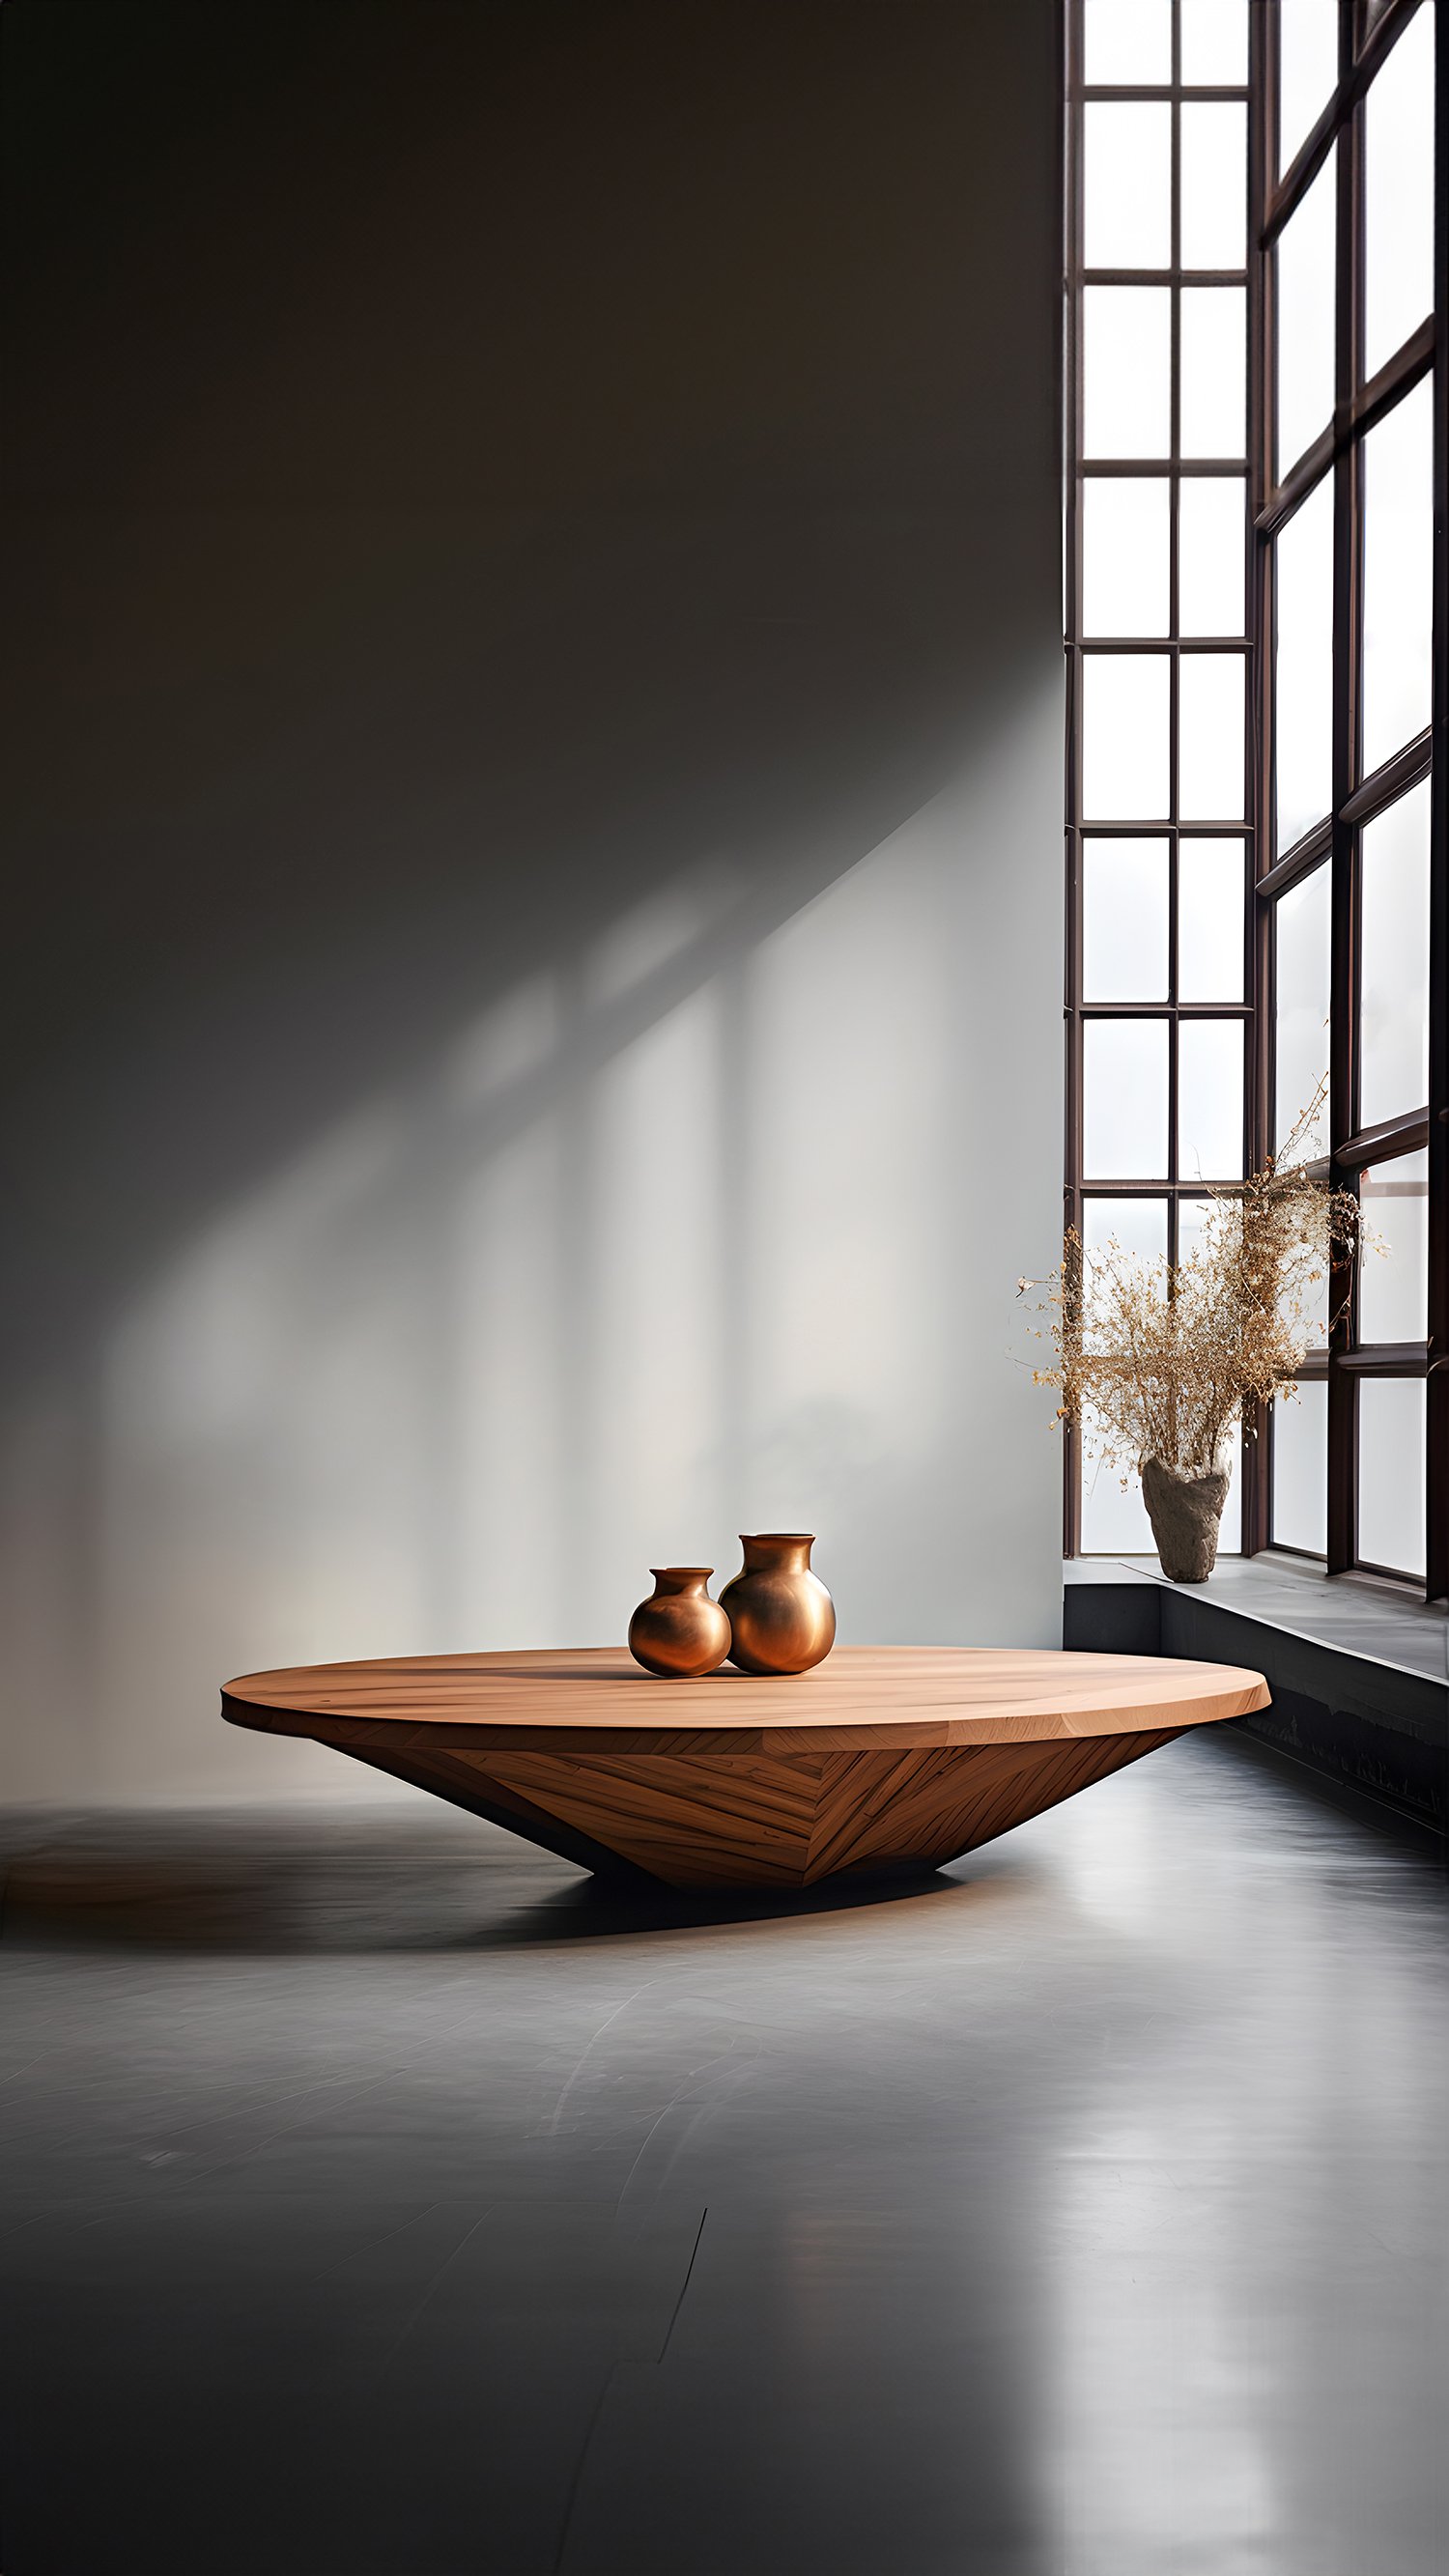 Oval Coffee Table Made of Solid Wood, Center Table Solace S21 by Joel Escalona —6.jpg